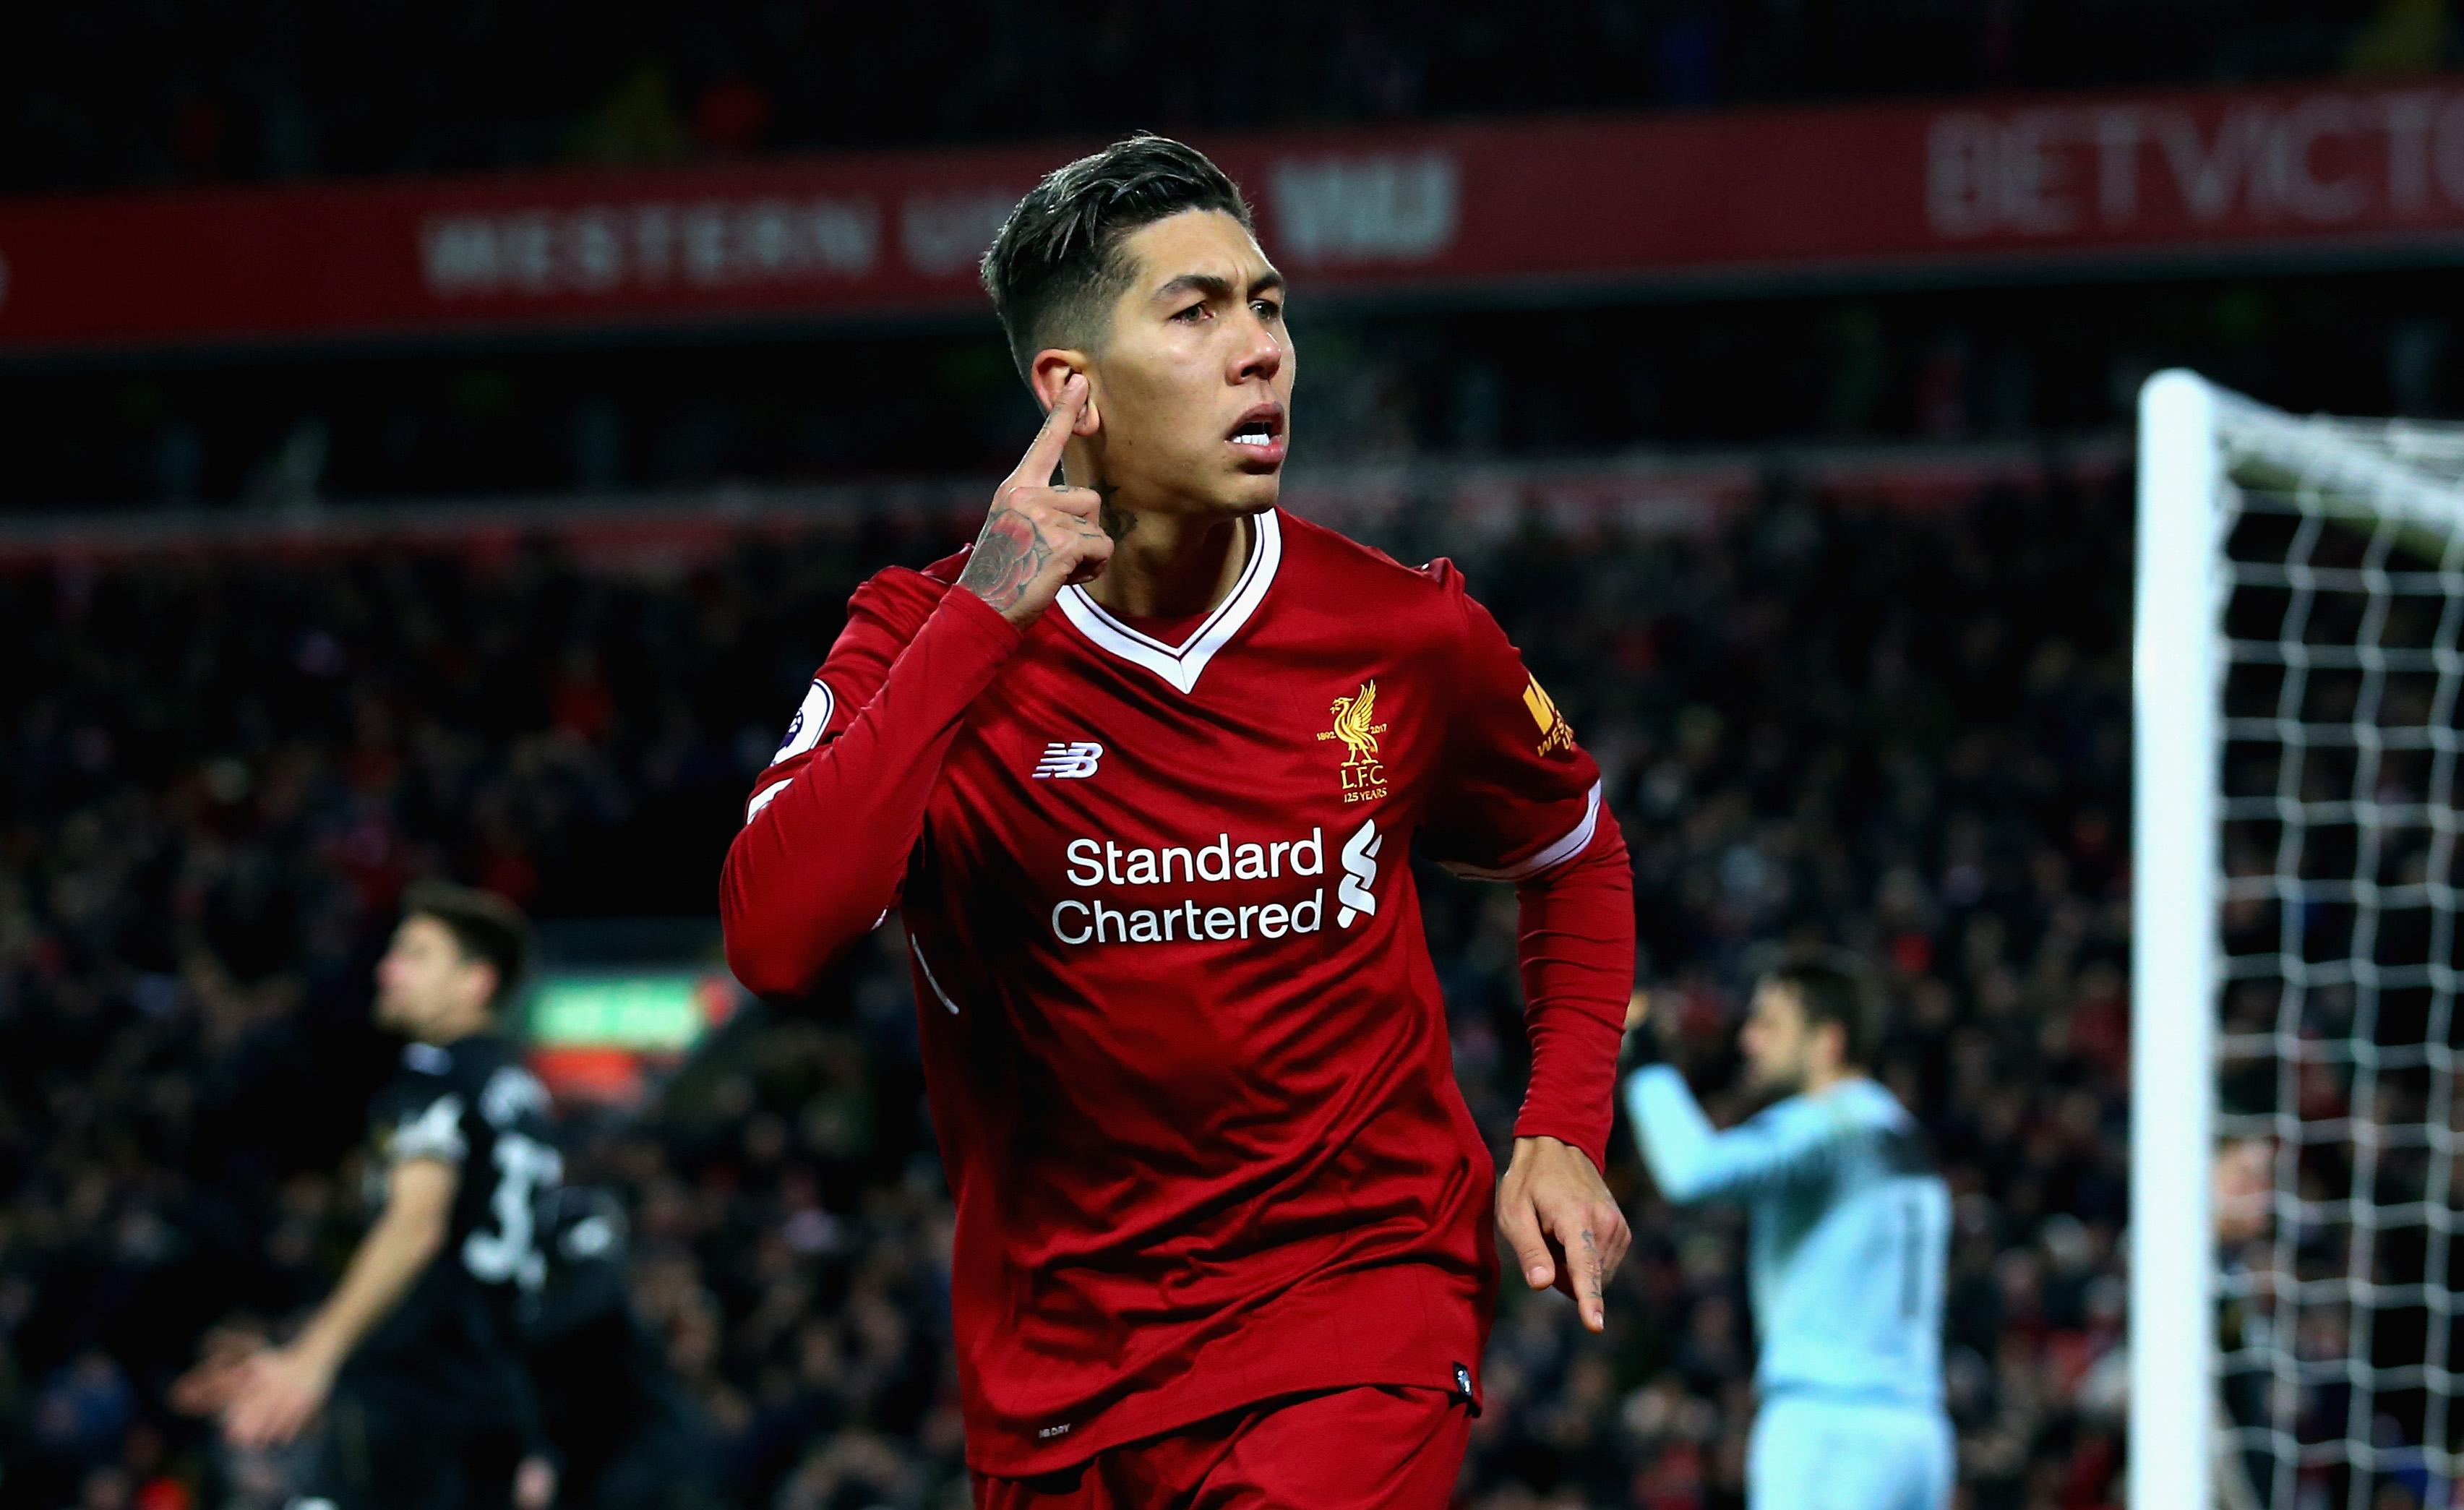 LIVERPOOL, ENGLAND - DECEMBER 26:  Roberto Firmino of Liverpool celebrates after scoring his sides second goal during the Premier League match between Liverpool and Swansea City at Anfield on December 26, 2017 in Liverpool, England.  (Photo by Jan Kruger/Getty Images)